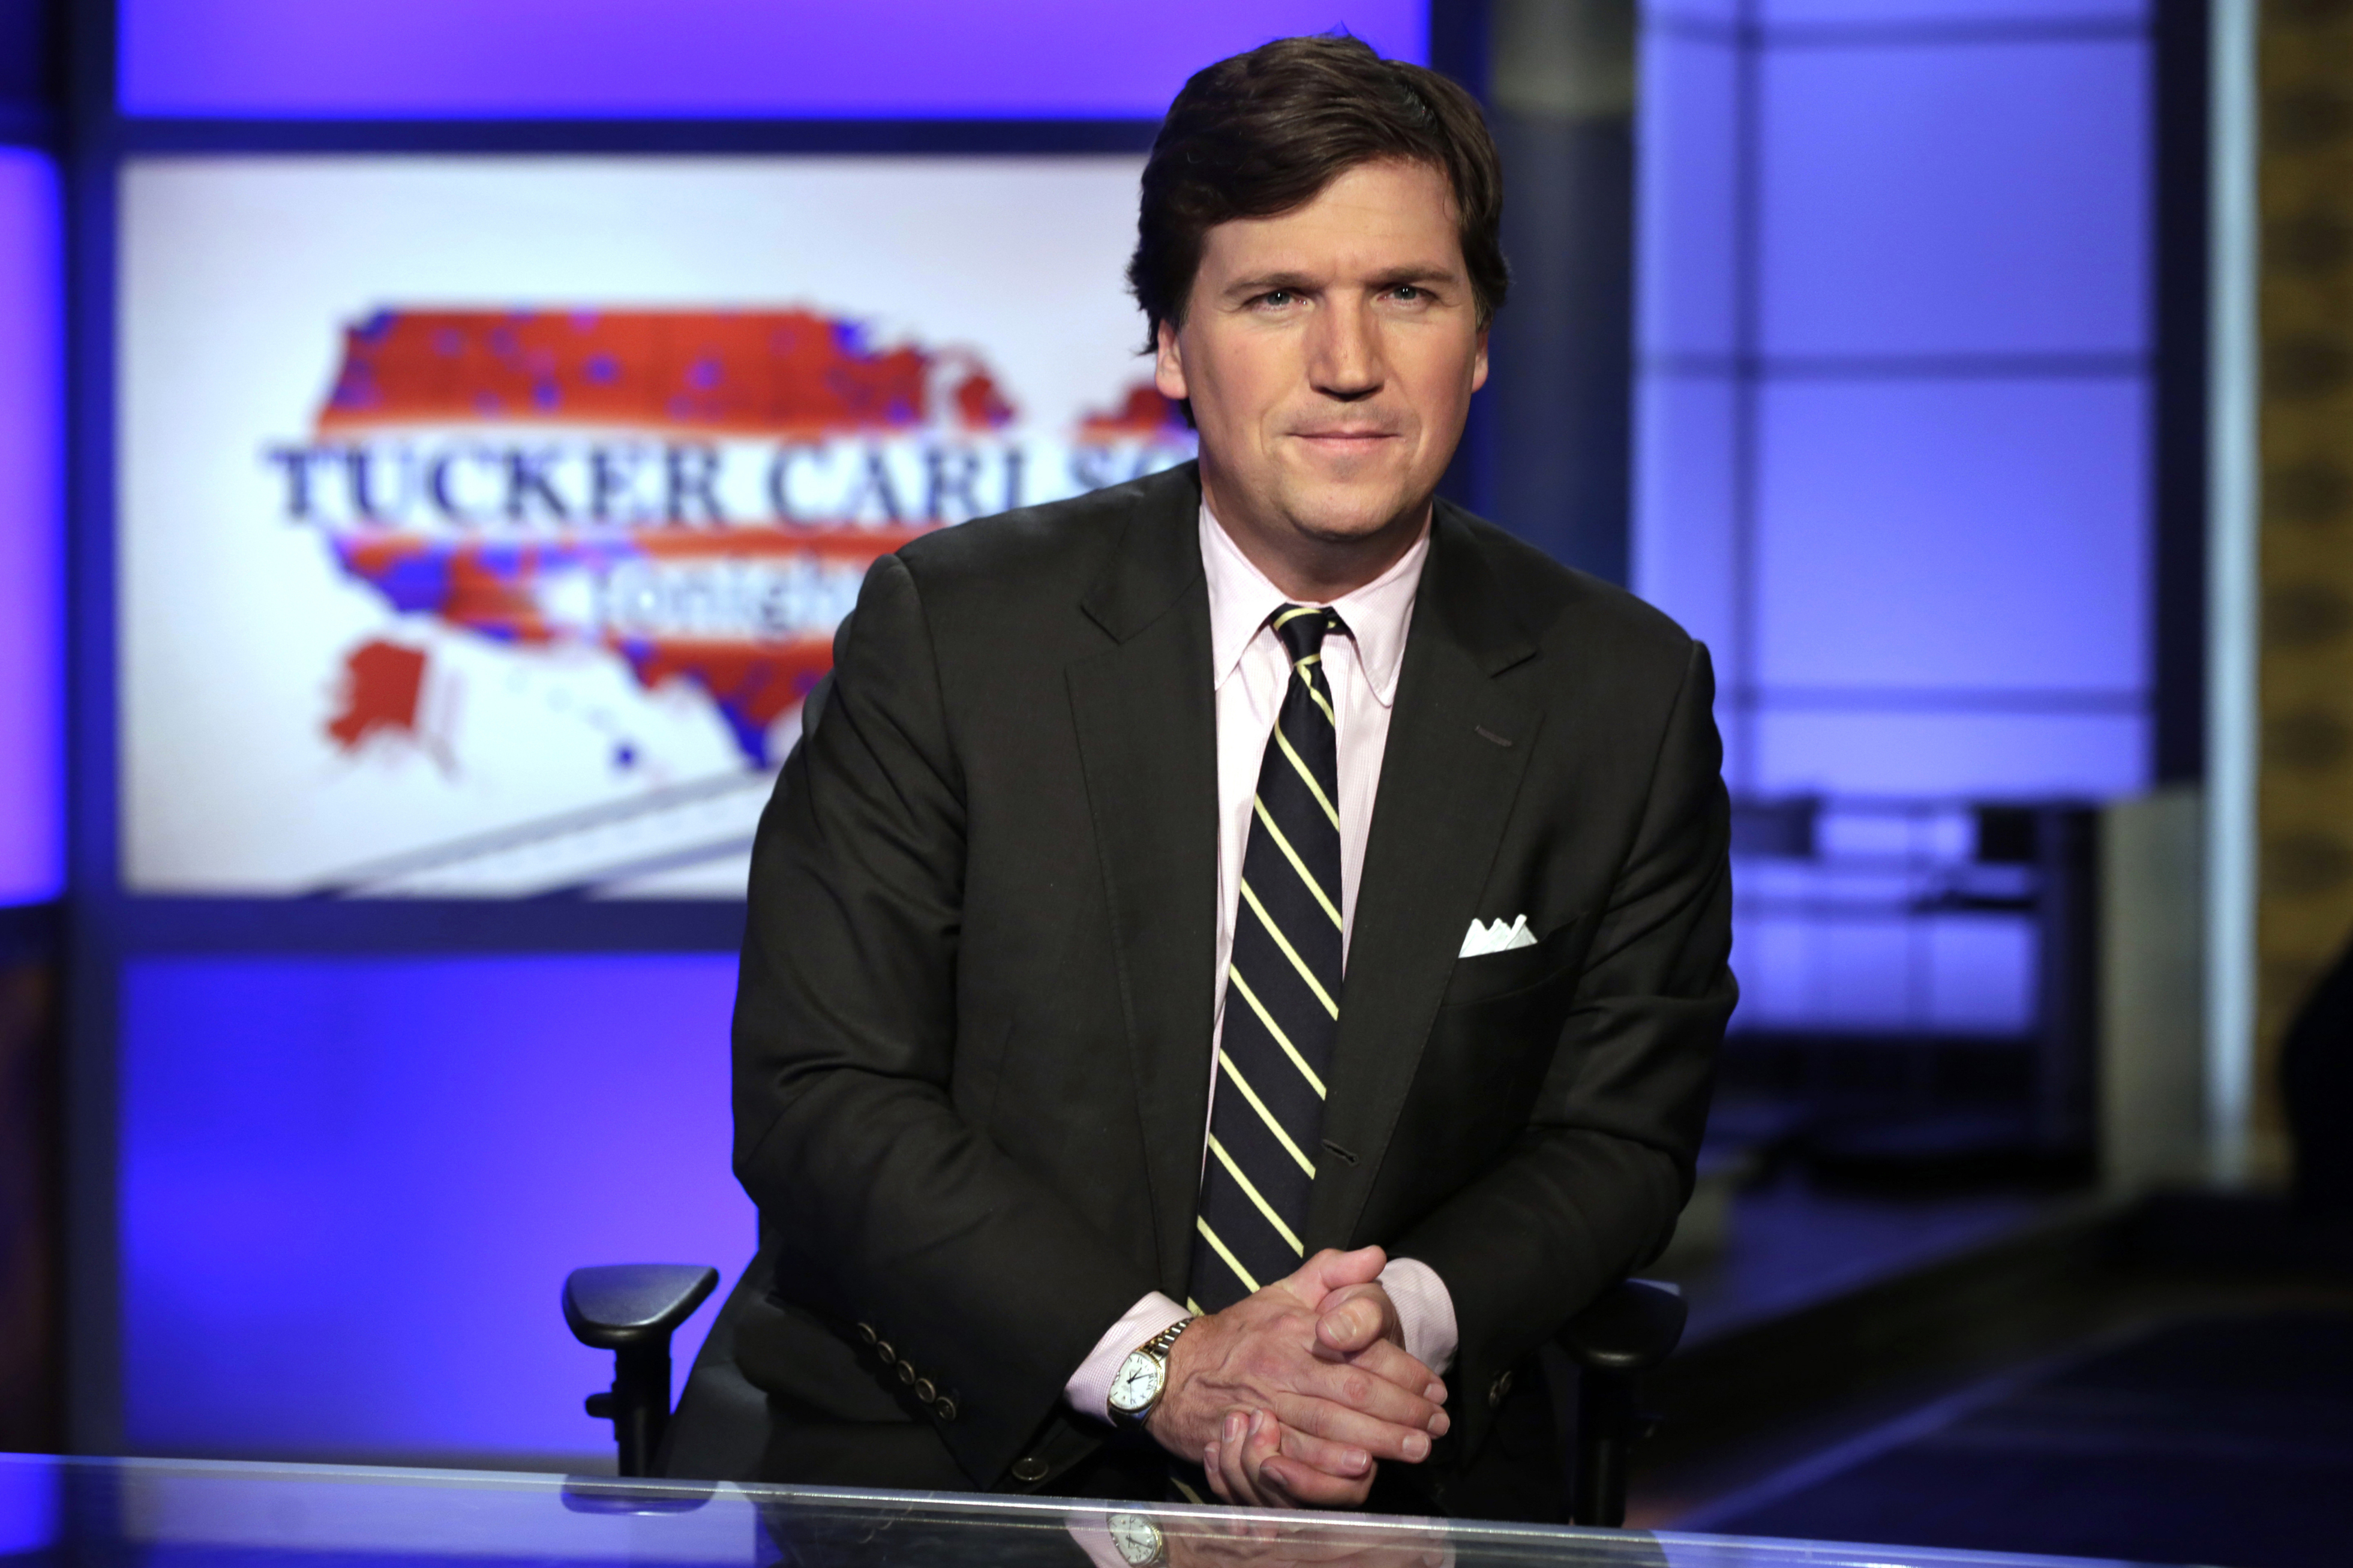 Tucker Carlson poses for photos in a Fox News Channel studio in New York on March 7, 2017.